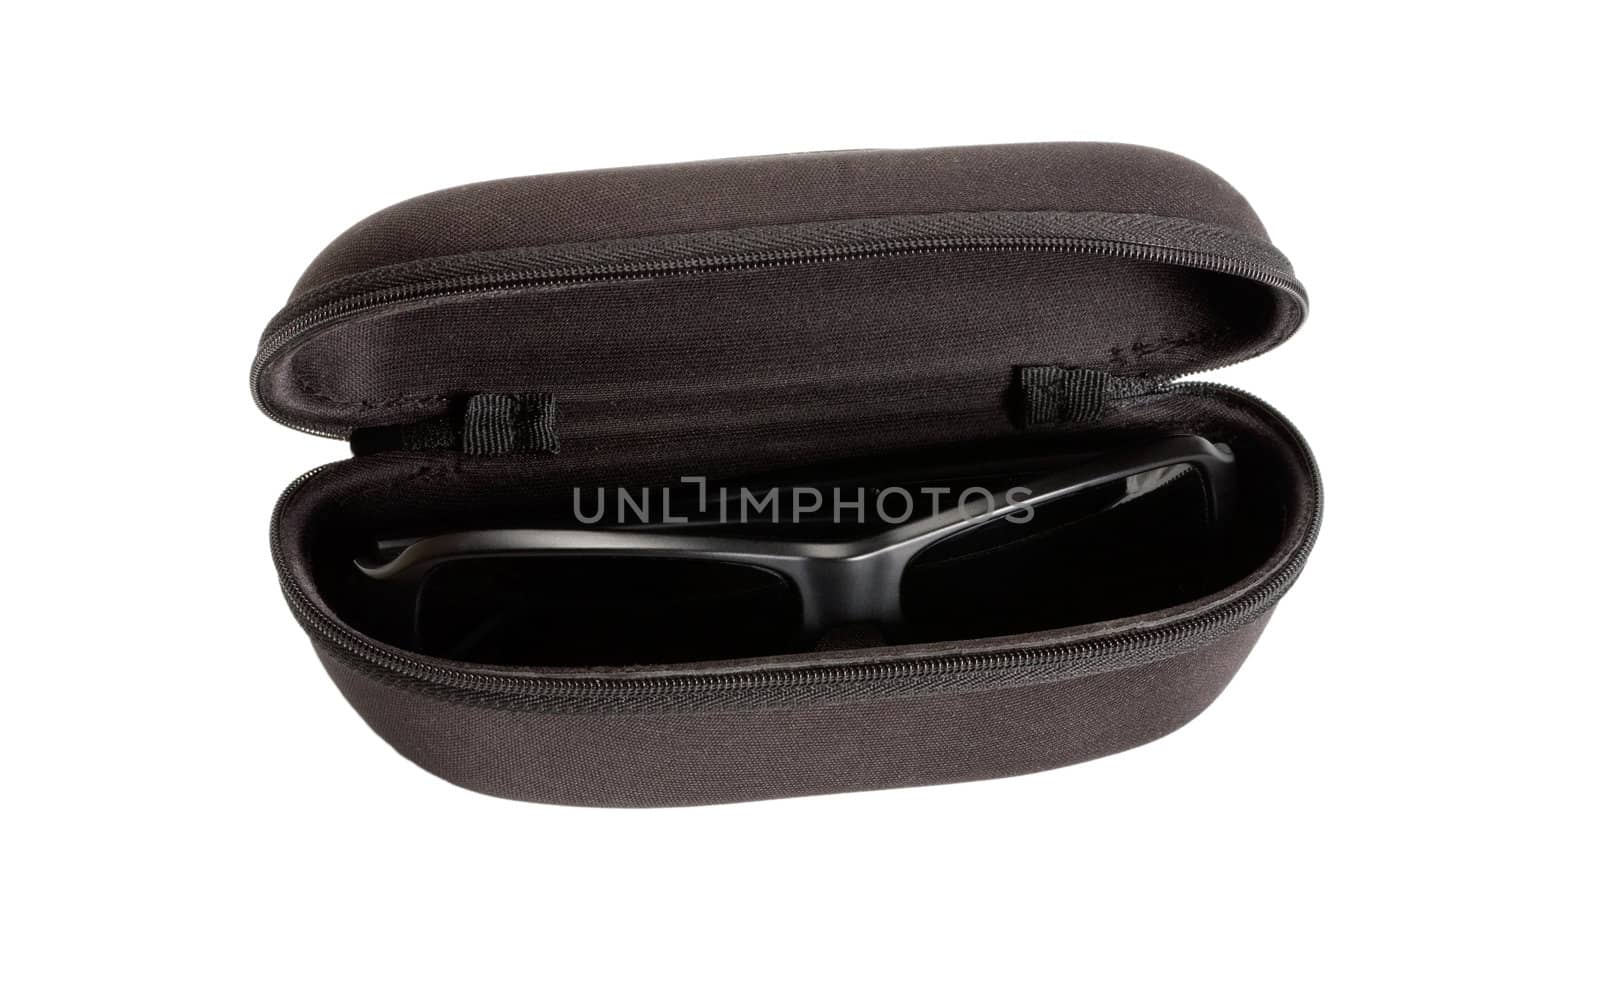 sunglasses and case isolated on white background.